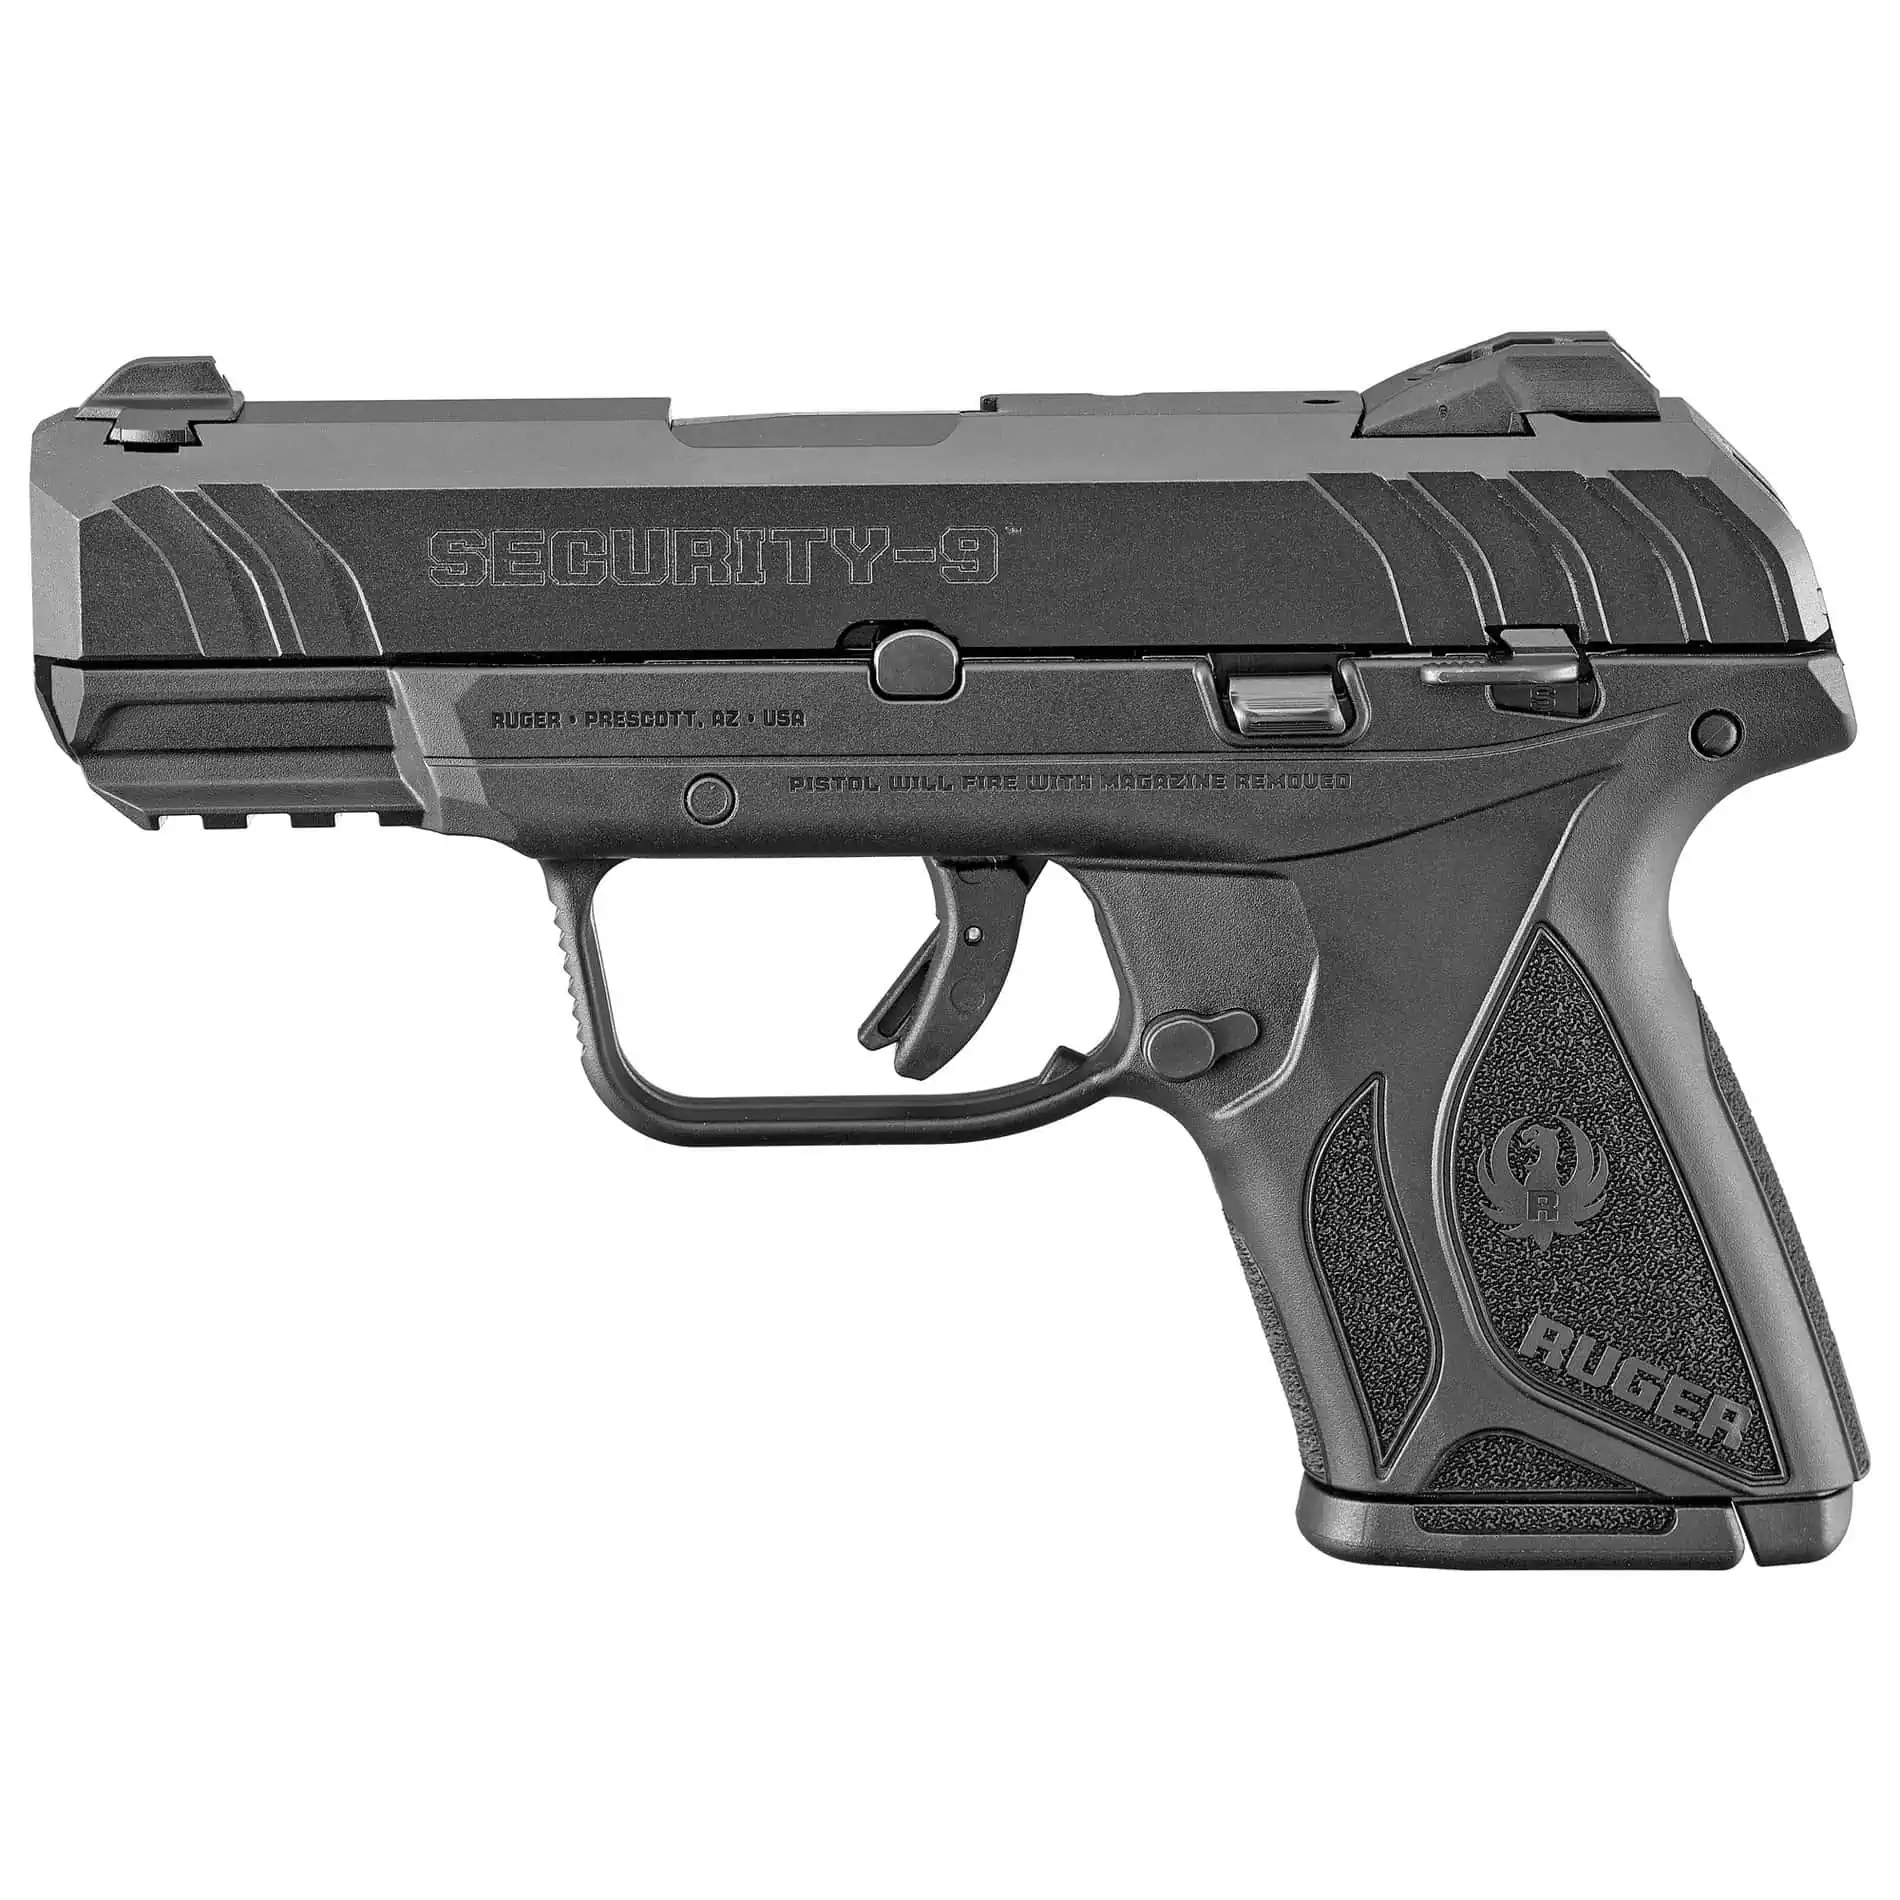 Ruger Security-9 Compact 9mm 3.4" Pistol - 10 Rounds - 3 Dot Sights